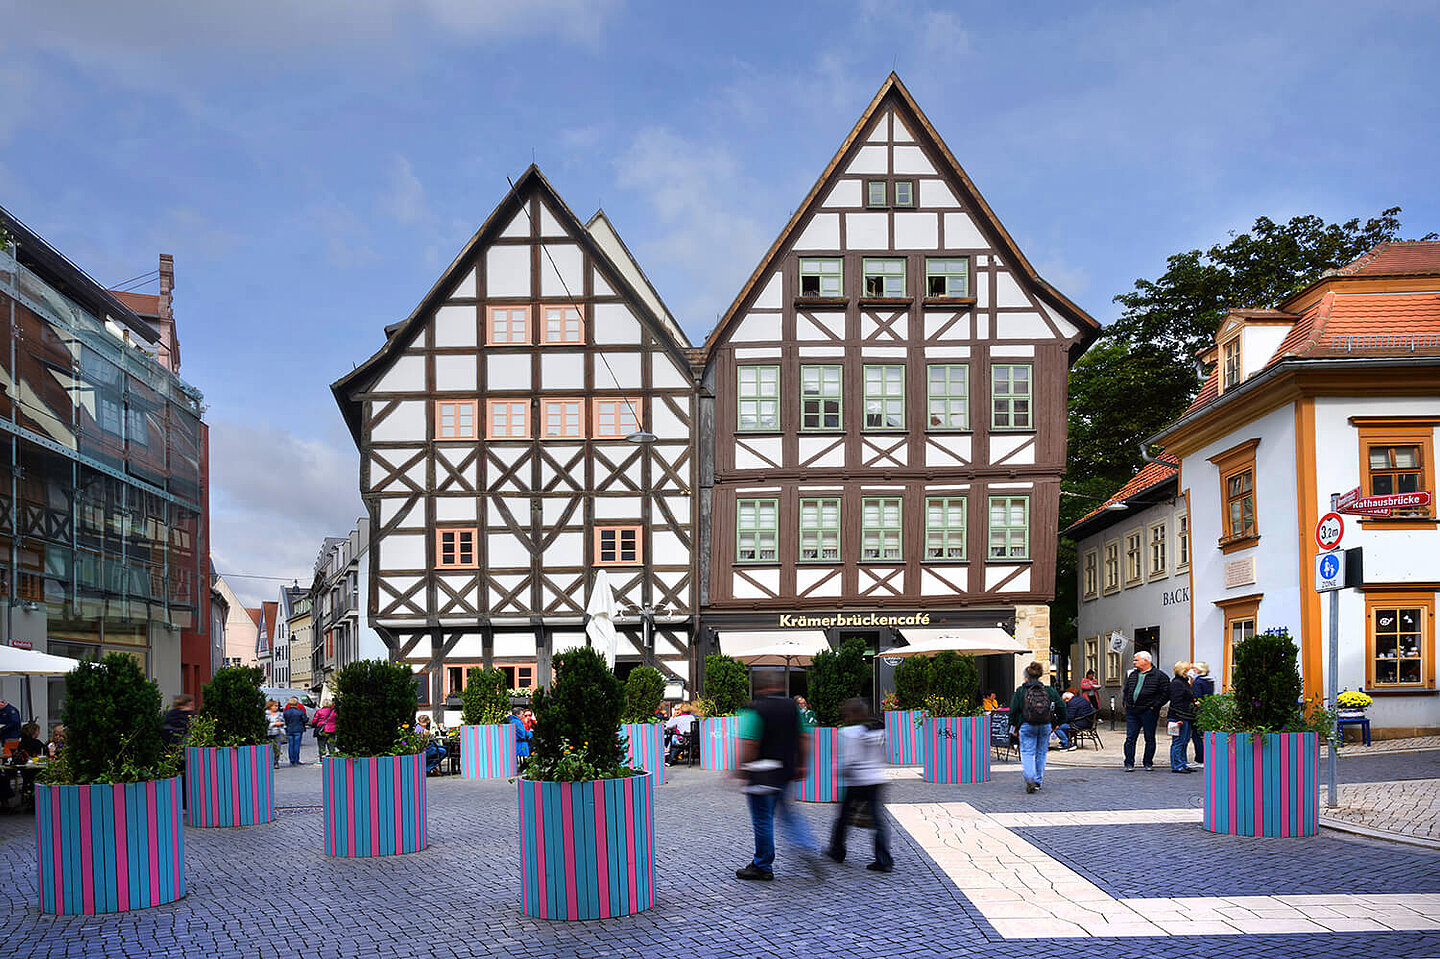 Two old half-timbered houses on the Krämerbrücke, in front of which are planted flower pots